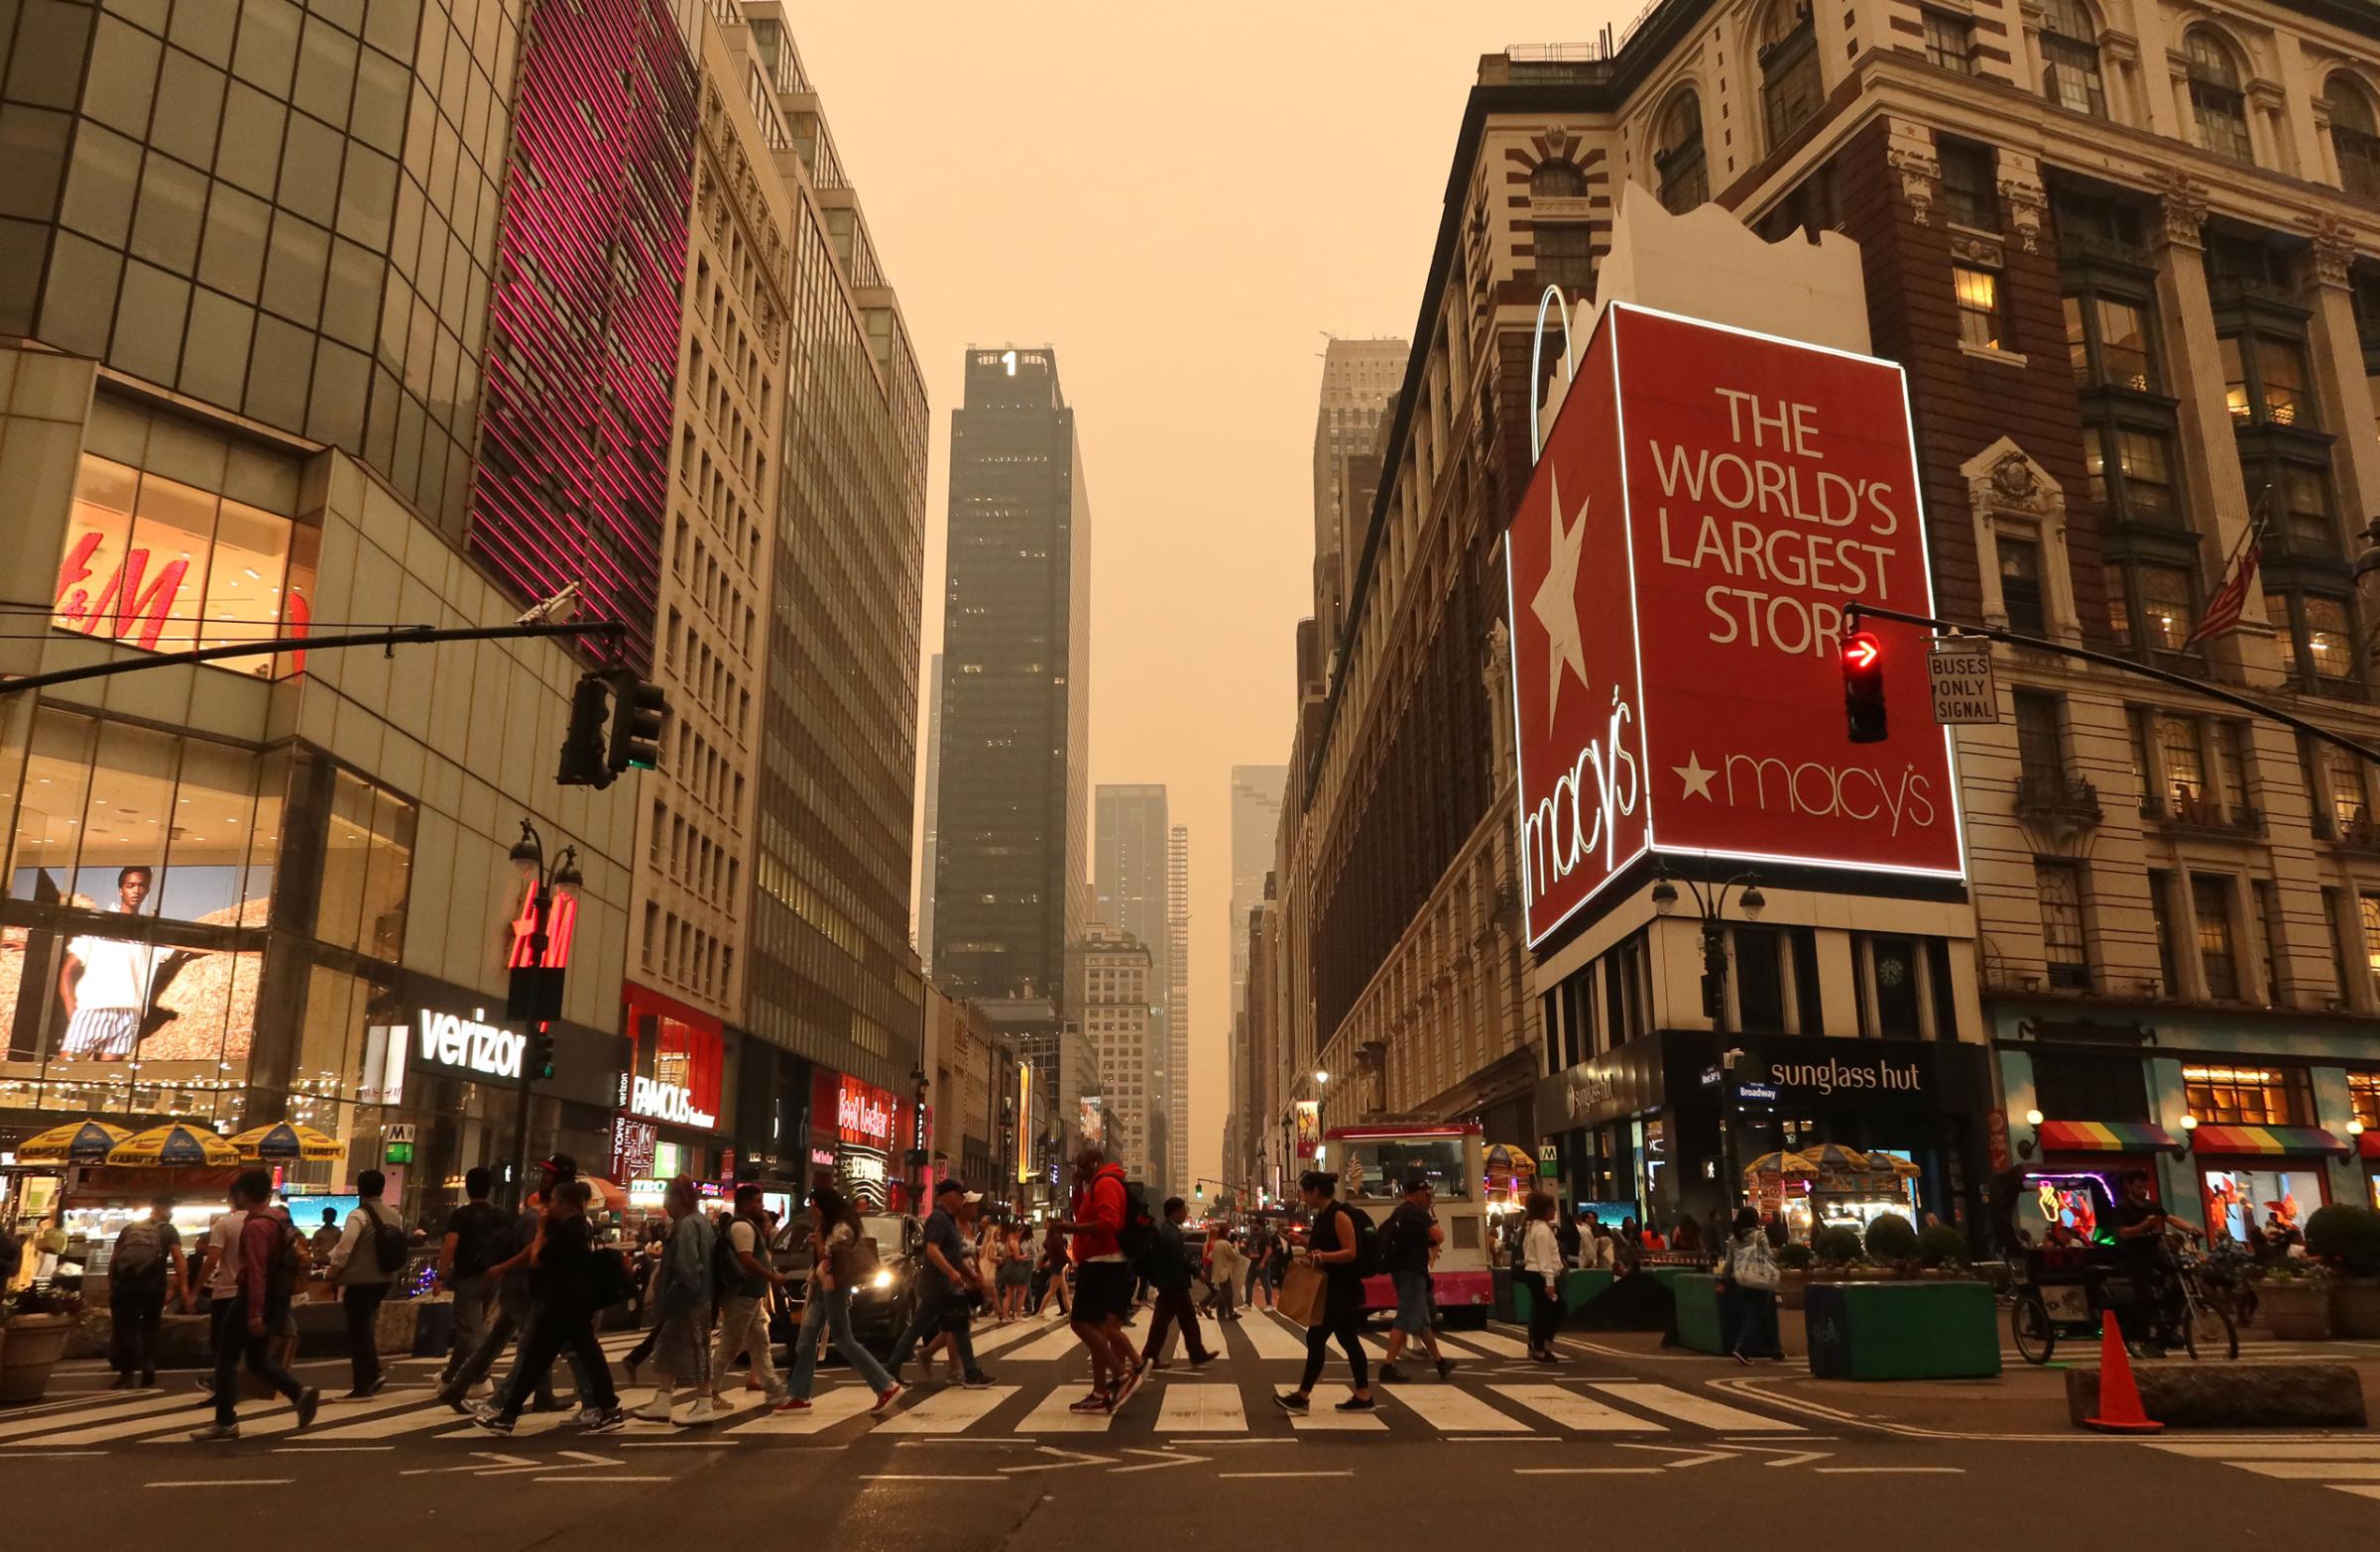 Heavy smoke fills the air as people cross 34th Street in Herald Square in New York City